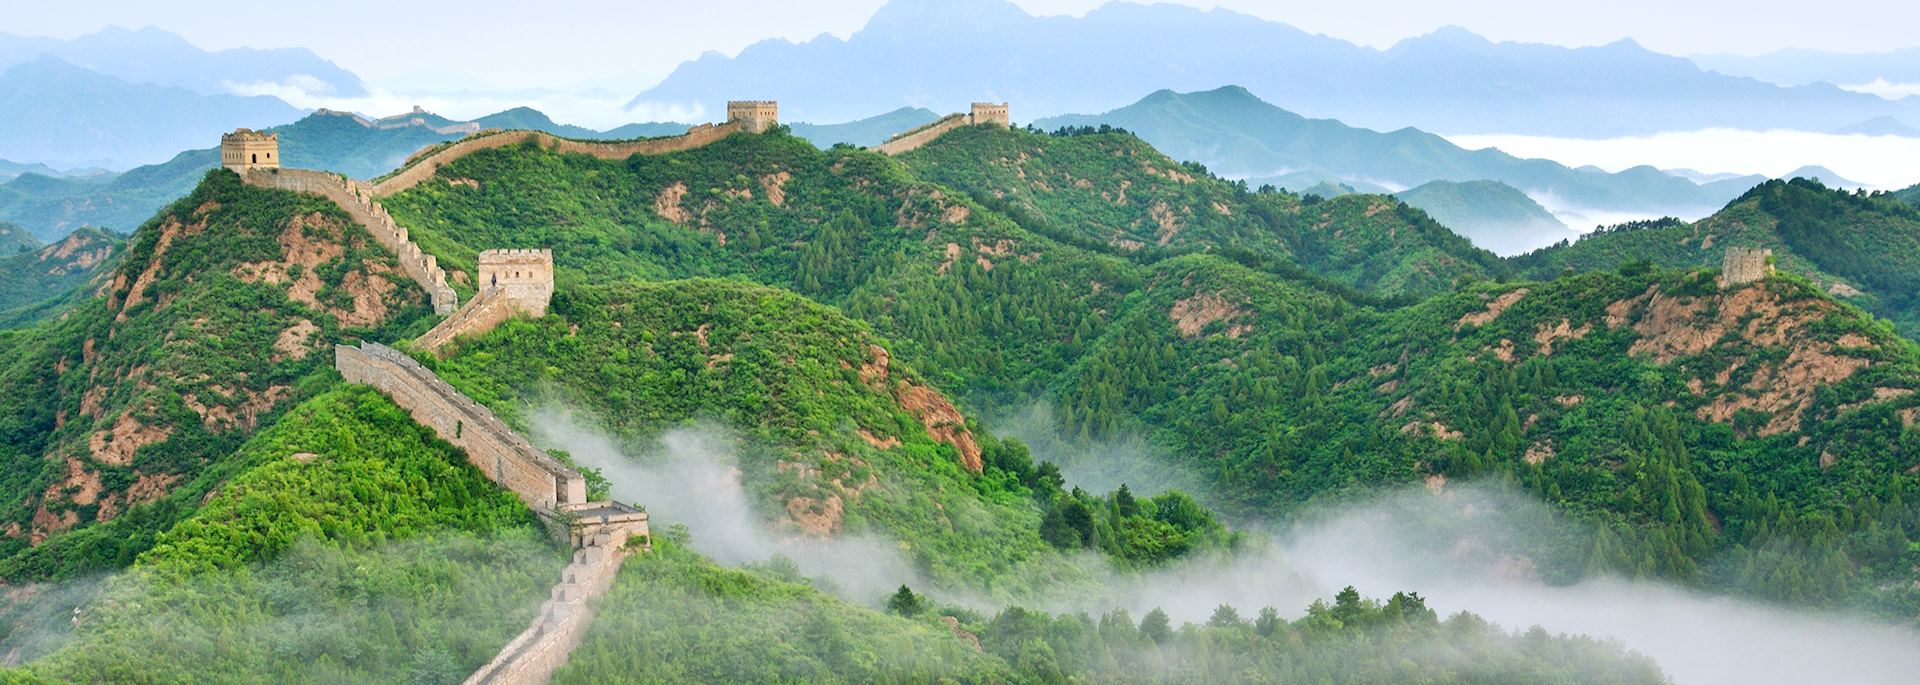 Mist, Great Wall of China